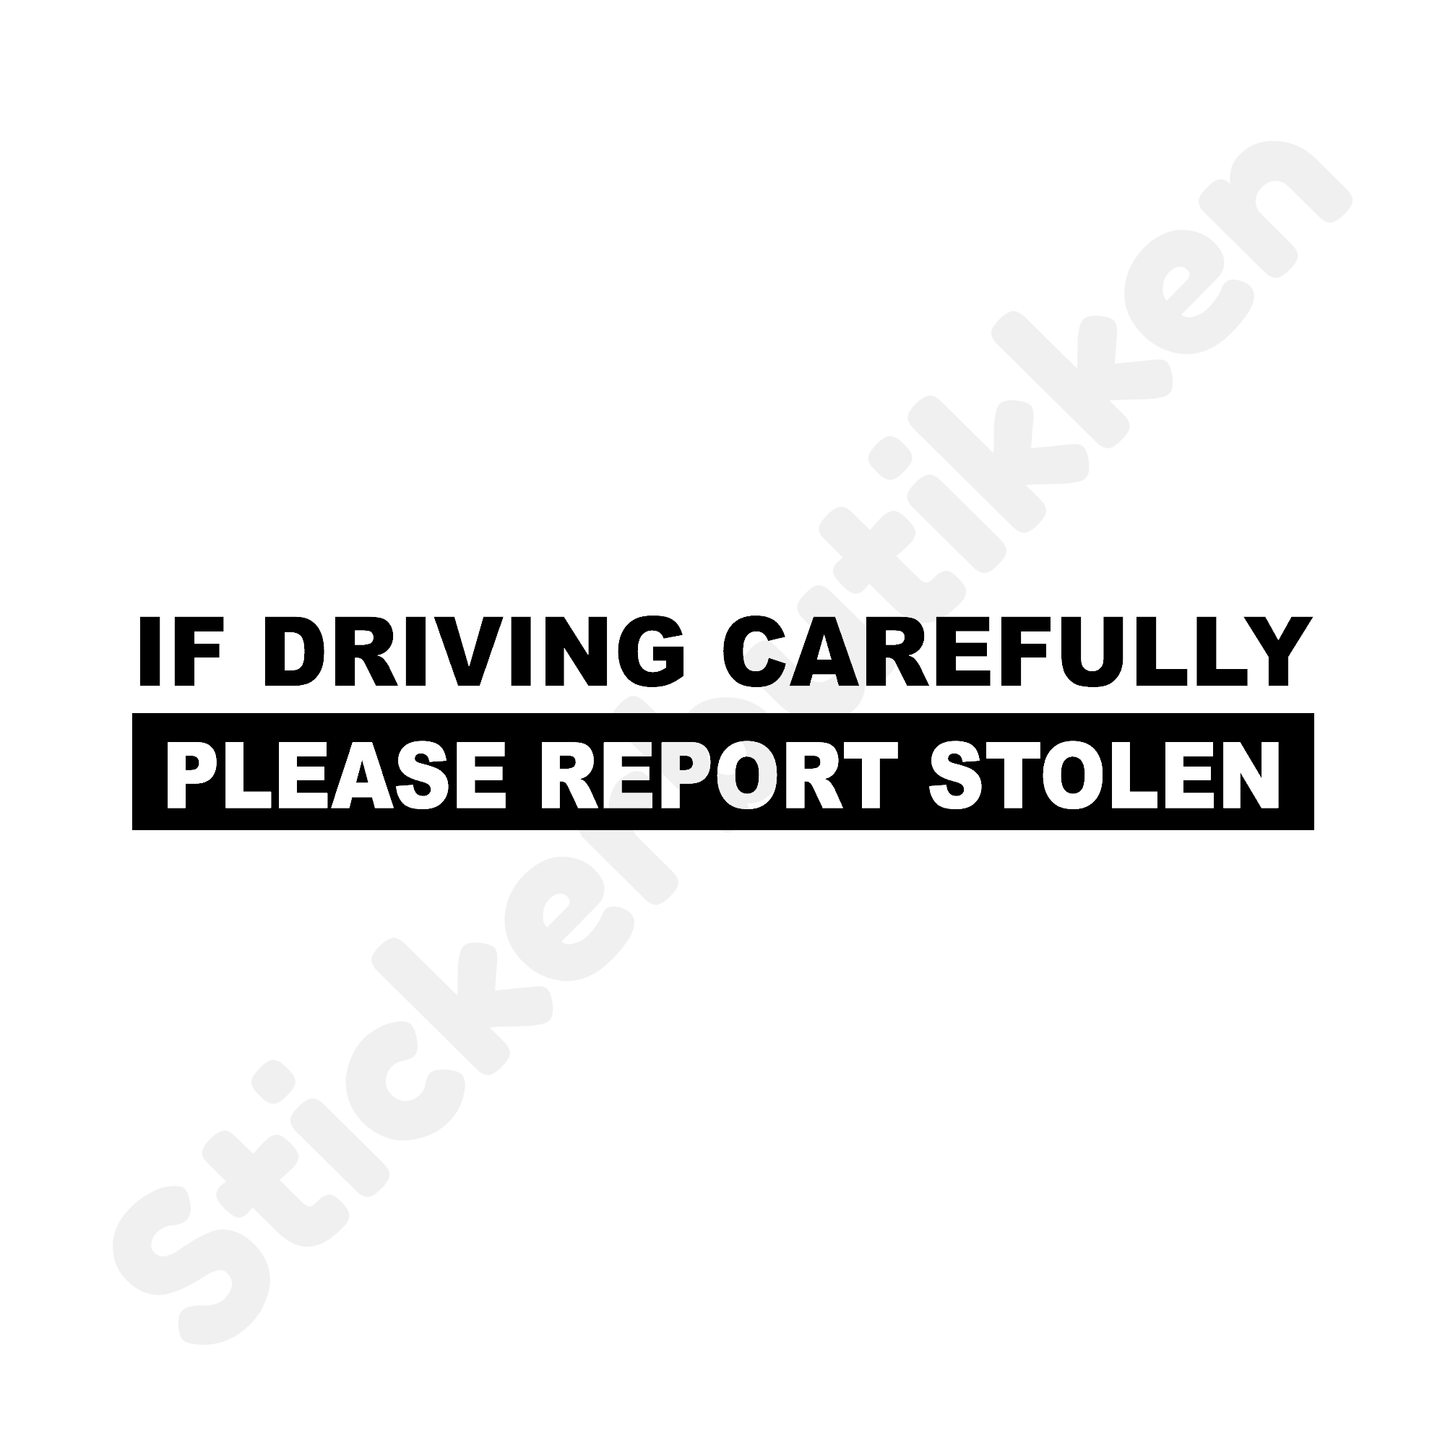 If Driving Carefully Please Report